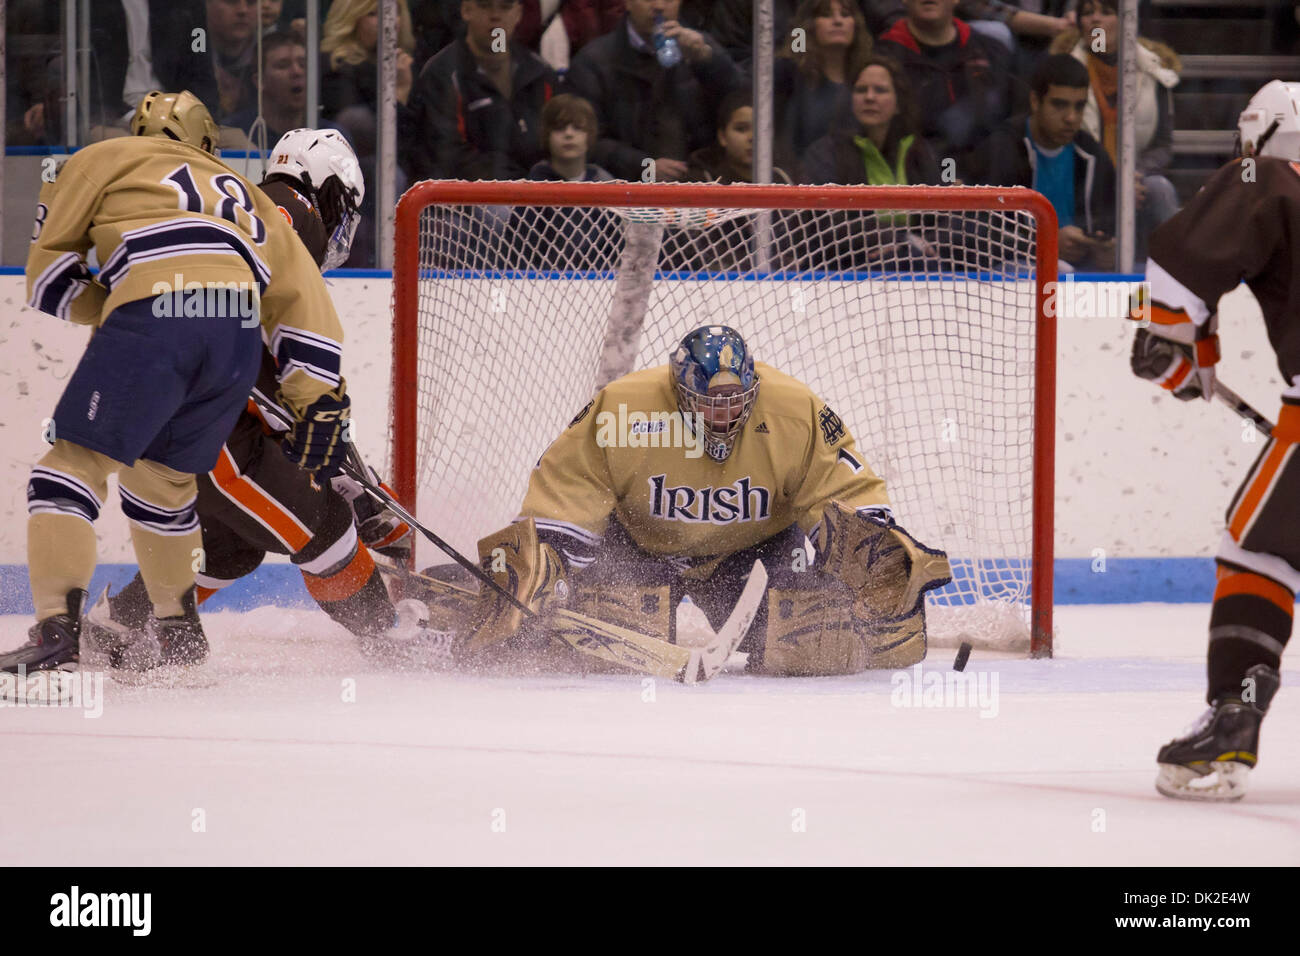 Feb. 12, 2011 - South Bend, Indiana, United States of America - Notre Dame goaltender Steven Summerhays (#1) makes the save on shot by Bowling Green forward Jordan Samuels-Thomas (#21) in second period action during NCAA hockey game between Bowling Green and Notre Dame.  The Notre Dame Fighting Irish defeated the Bowling Green Falcons 5-1 in game at Joyce Center in South Bend, Indi Stock Photo